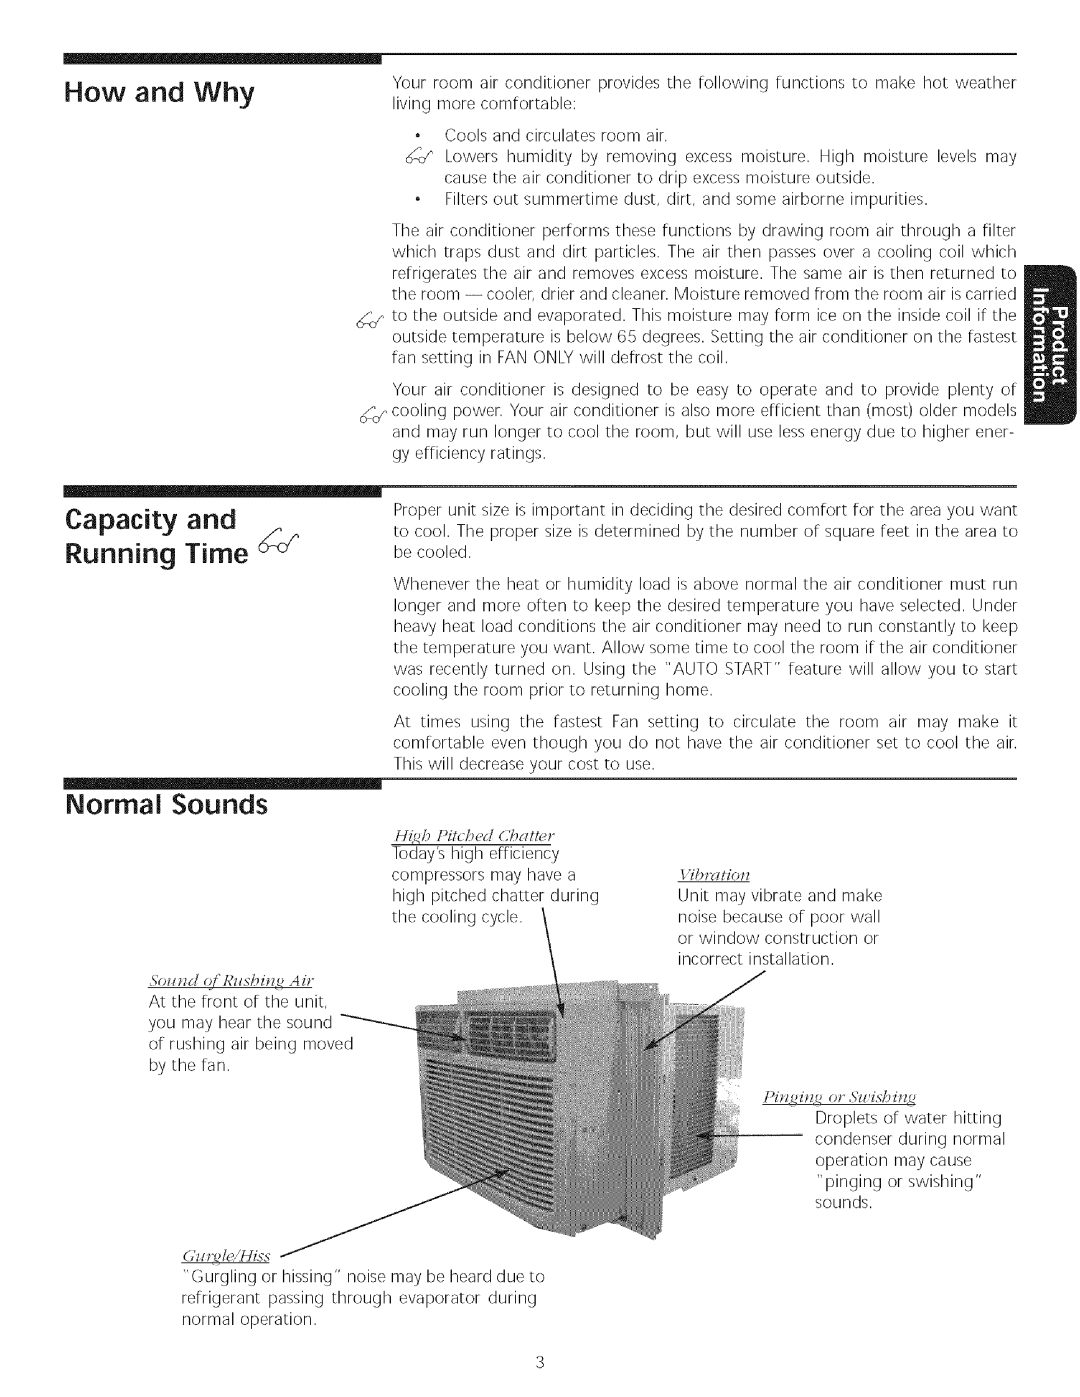 Kenmore Air Conditioner owner manual How and Why Capacity and Running Time, Normal Sounds, So ftzdctflR sbit ,.,Air 